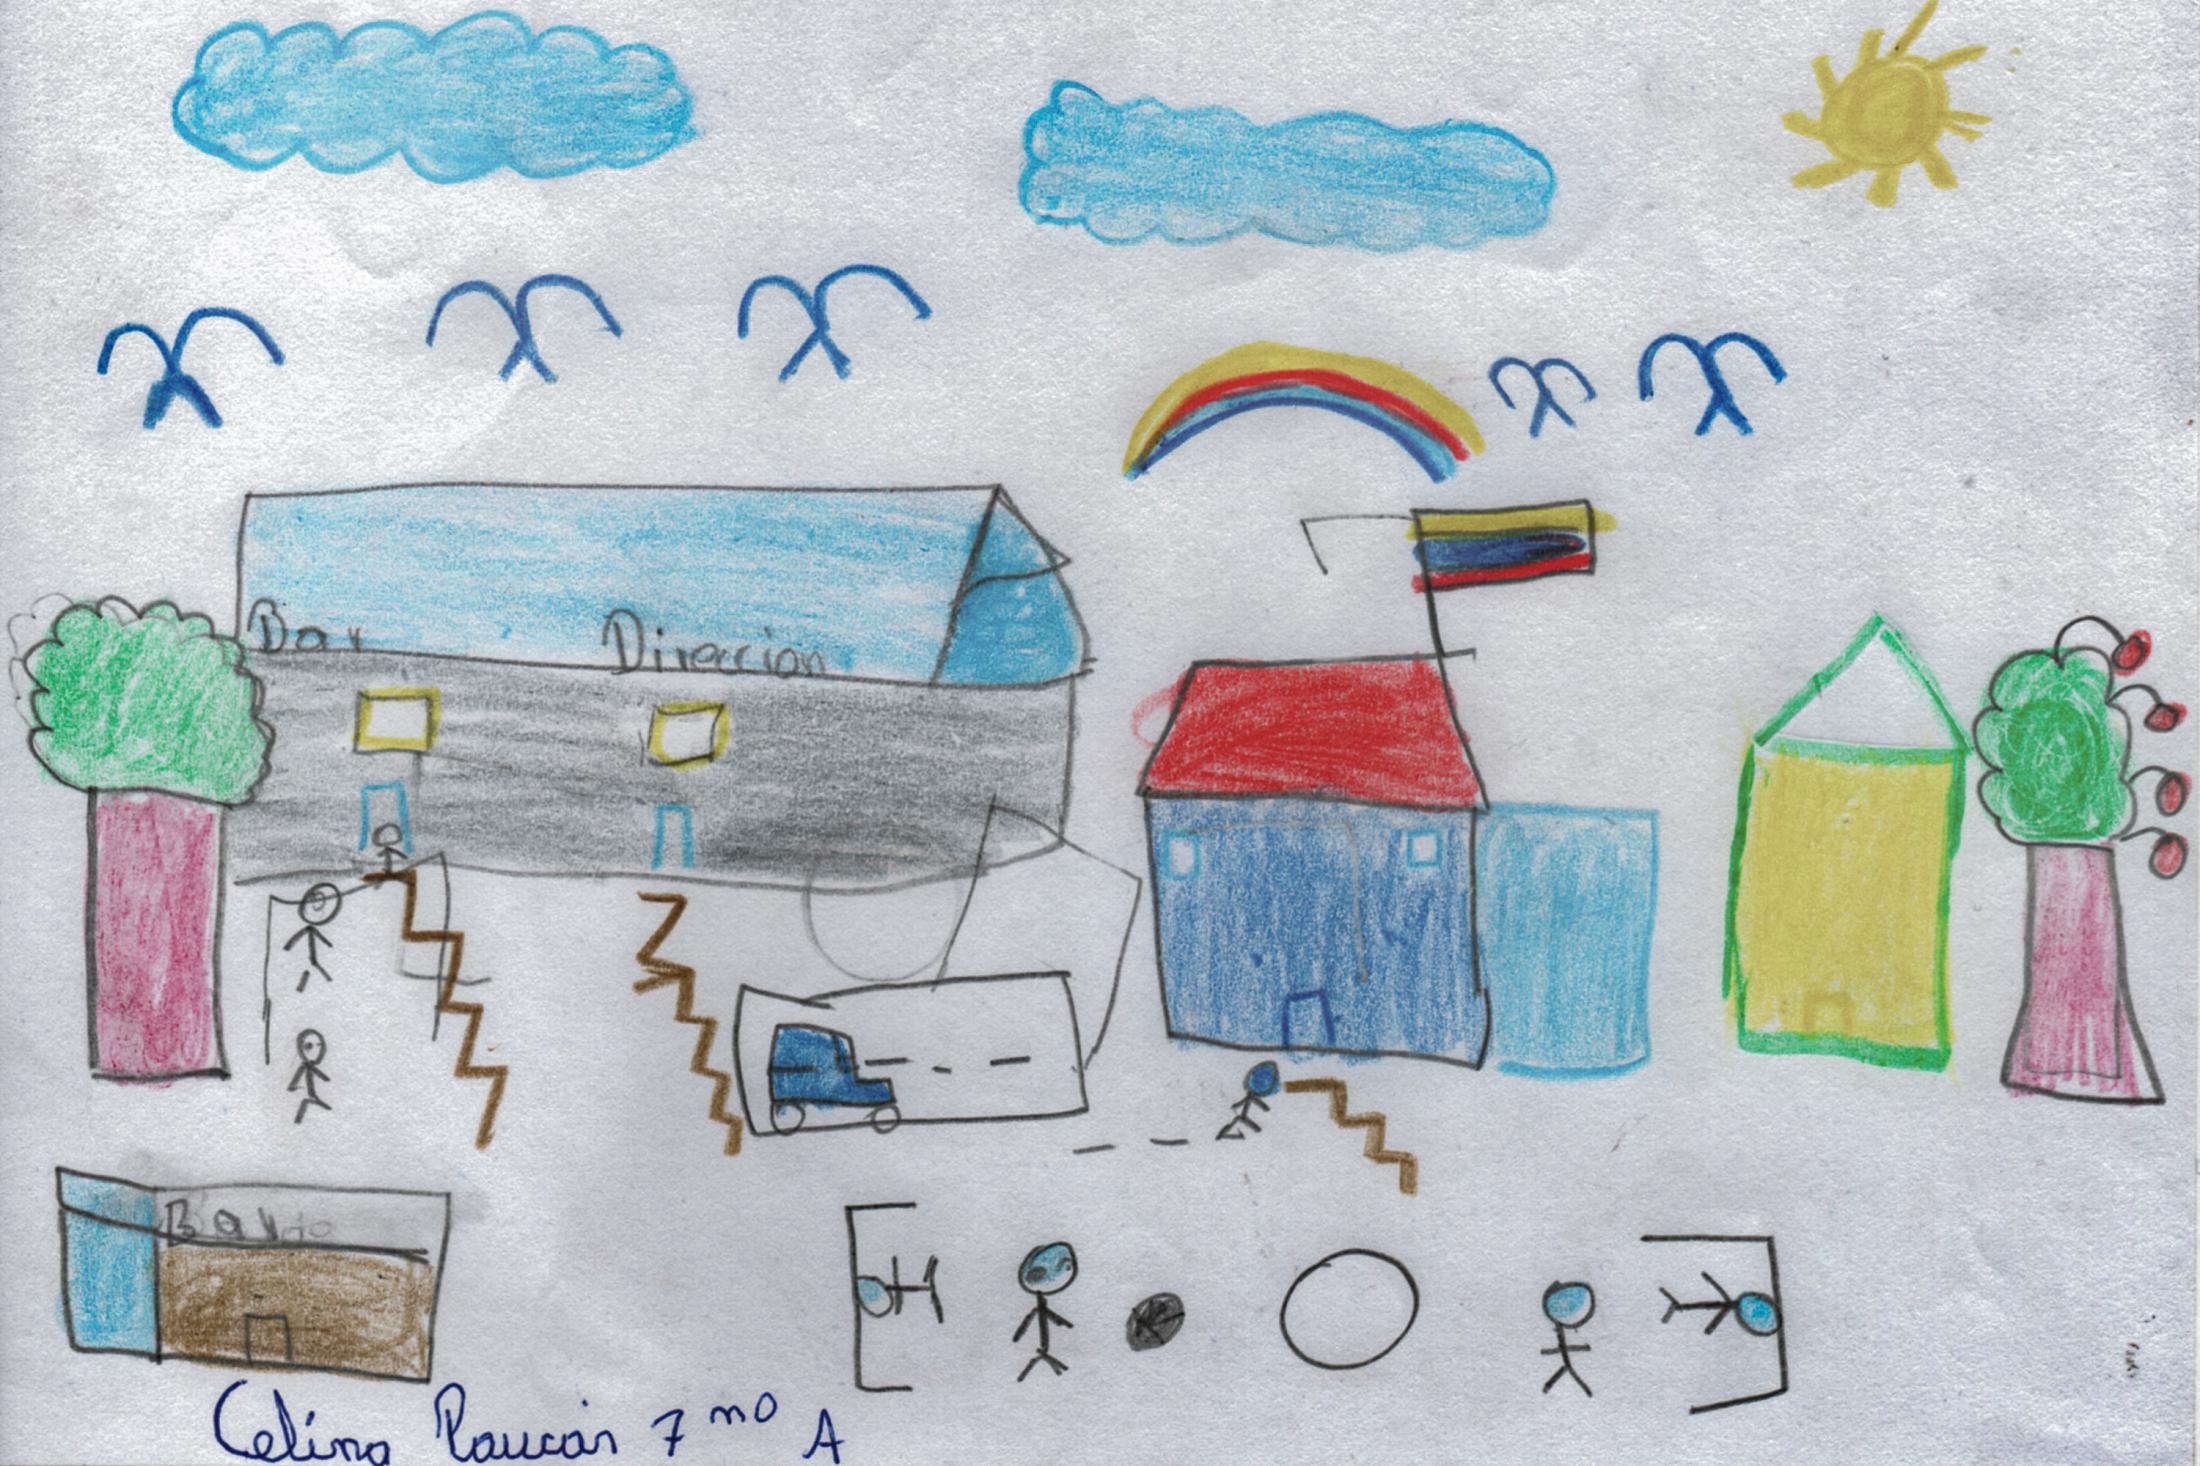 Drawing of the Ruperto Alarc&oacute;n Falcon&iacute; School by Celina Paucar (12), one of its students Many children miss school and the daily routine of their school days before they were suspended because of the health emergency. May 22, 2020. Cotogchoa-Ecuador. Andr&eacute;s Y&eacute;pez.